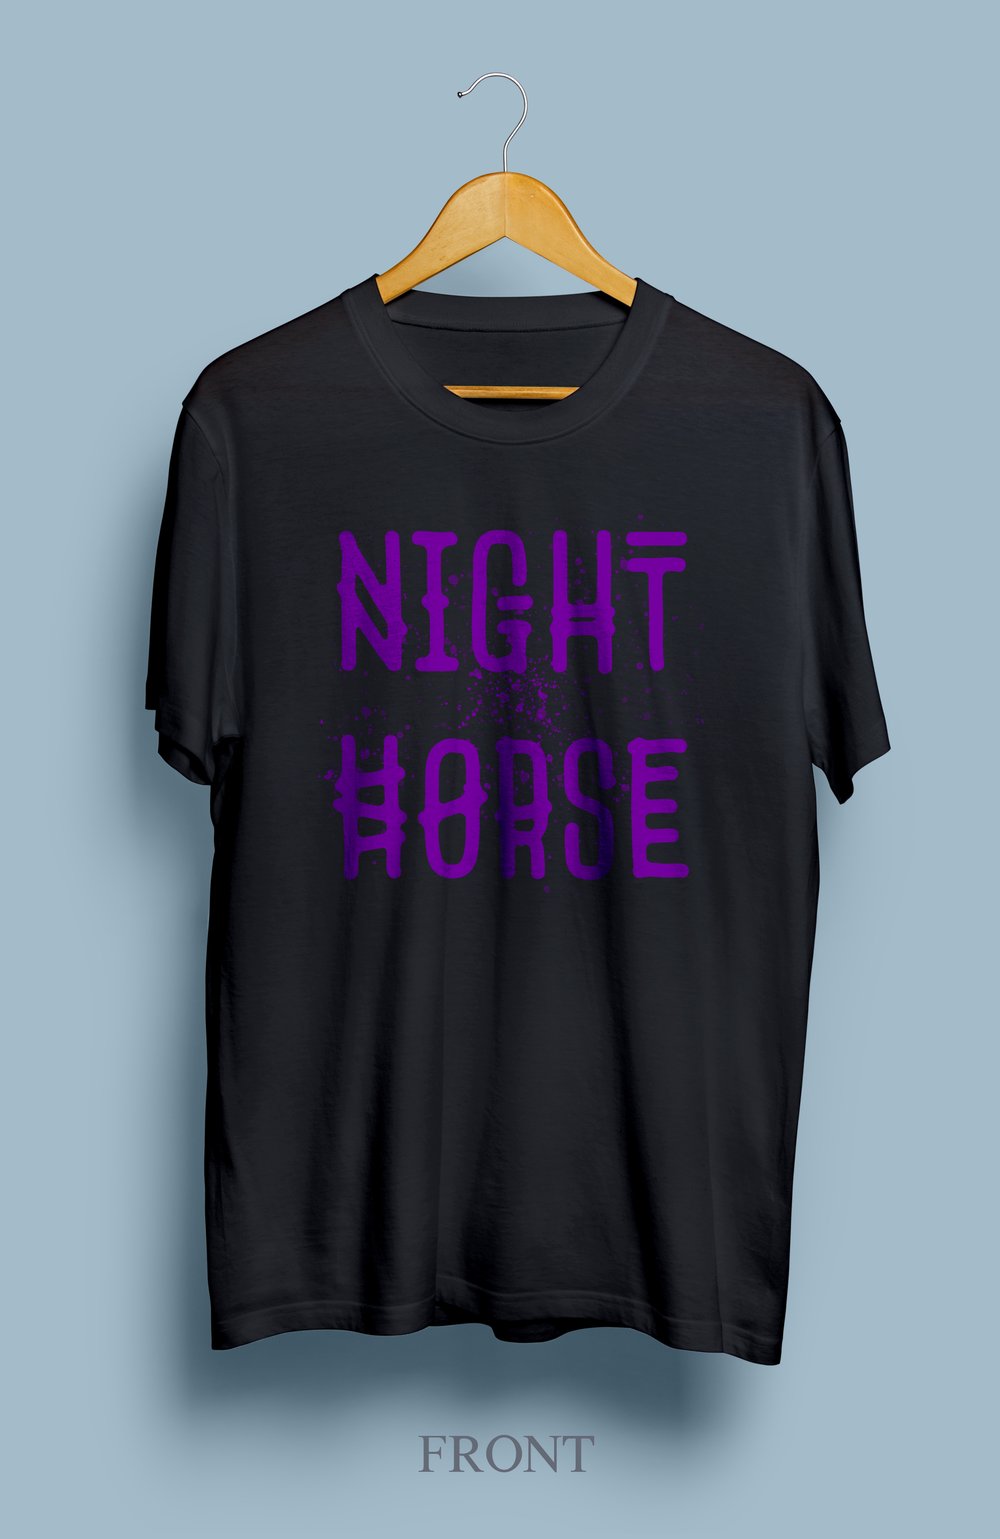 NIGHT HORSE "Rock n Roll Will Never Die" t-shirt